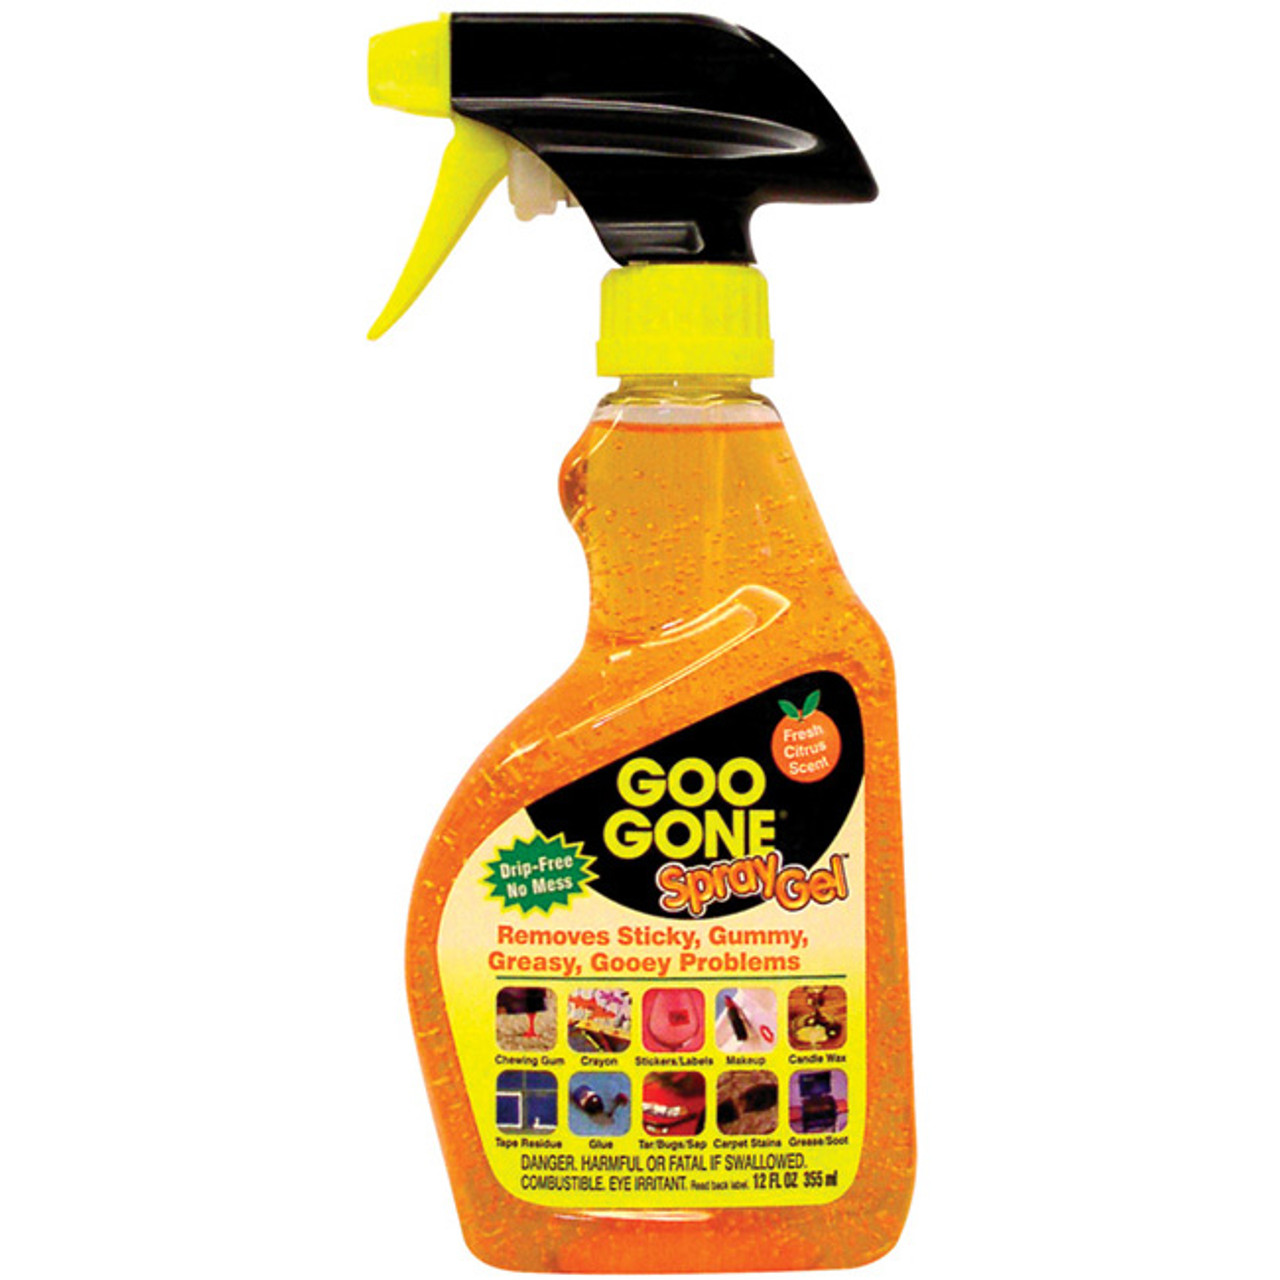 Goo Gone Latex Paint Clean Up 24 oz Trigger - Fastest, Easiest Way to Remove  Paint and Varnish Messes - Carpet Cleaning - Removes Stains in the Adhesive  Removers department at